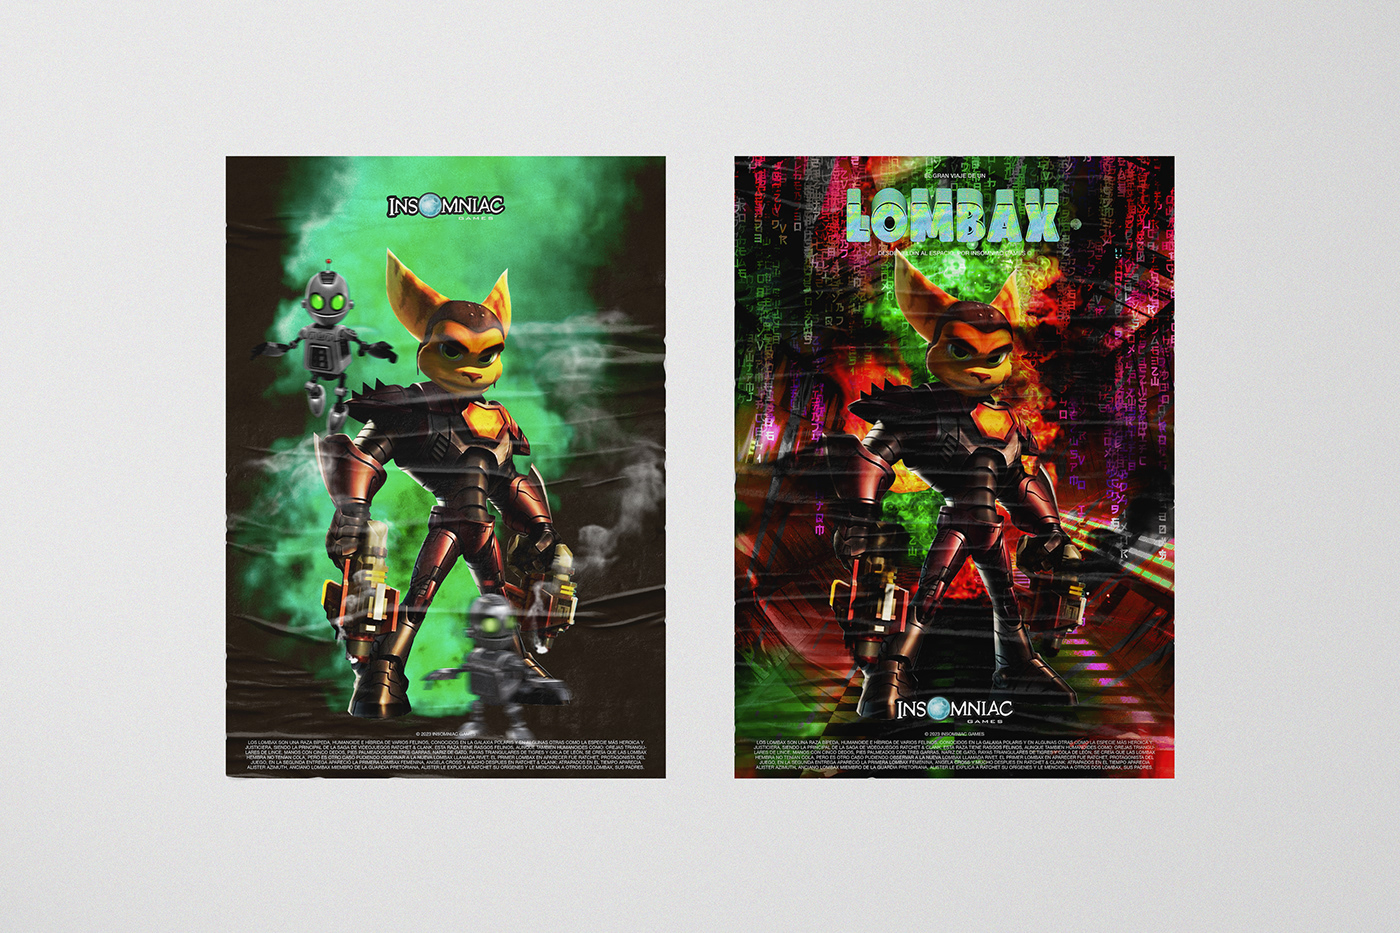 effects Film   game Insomniac lombax playstation poster vfx Clank Ratchet